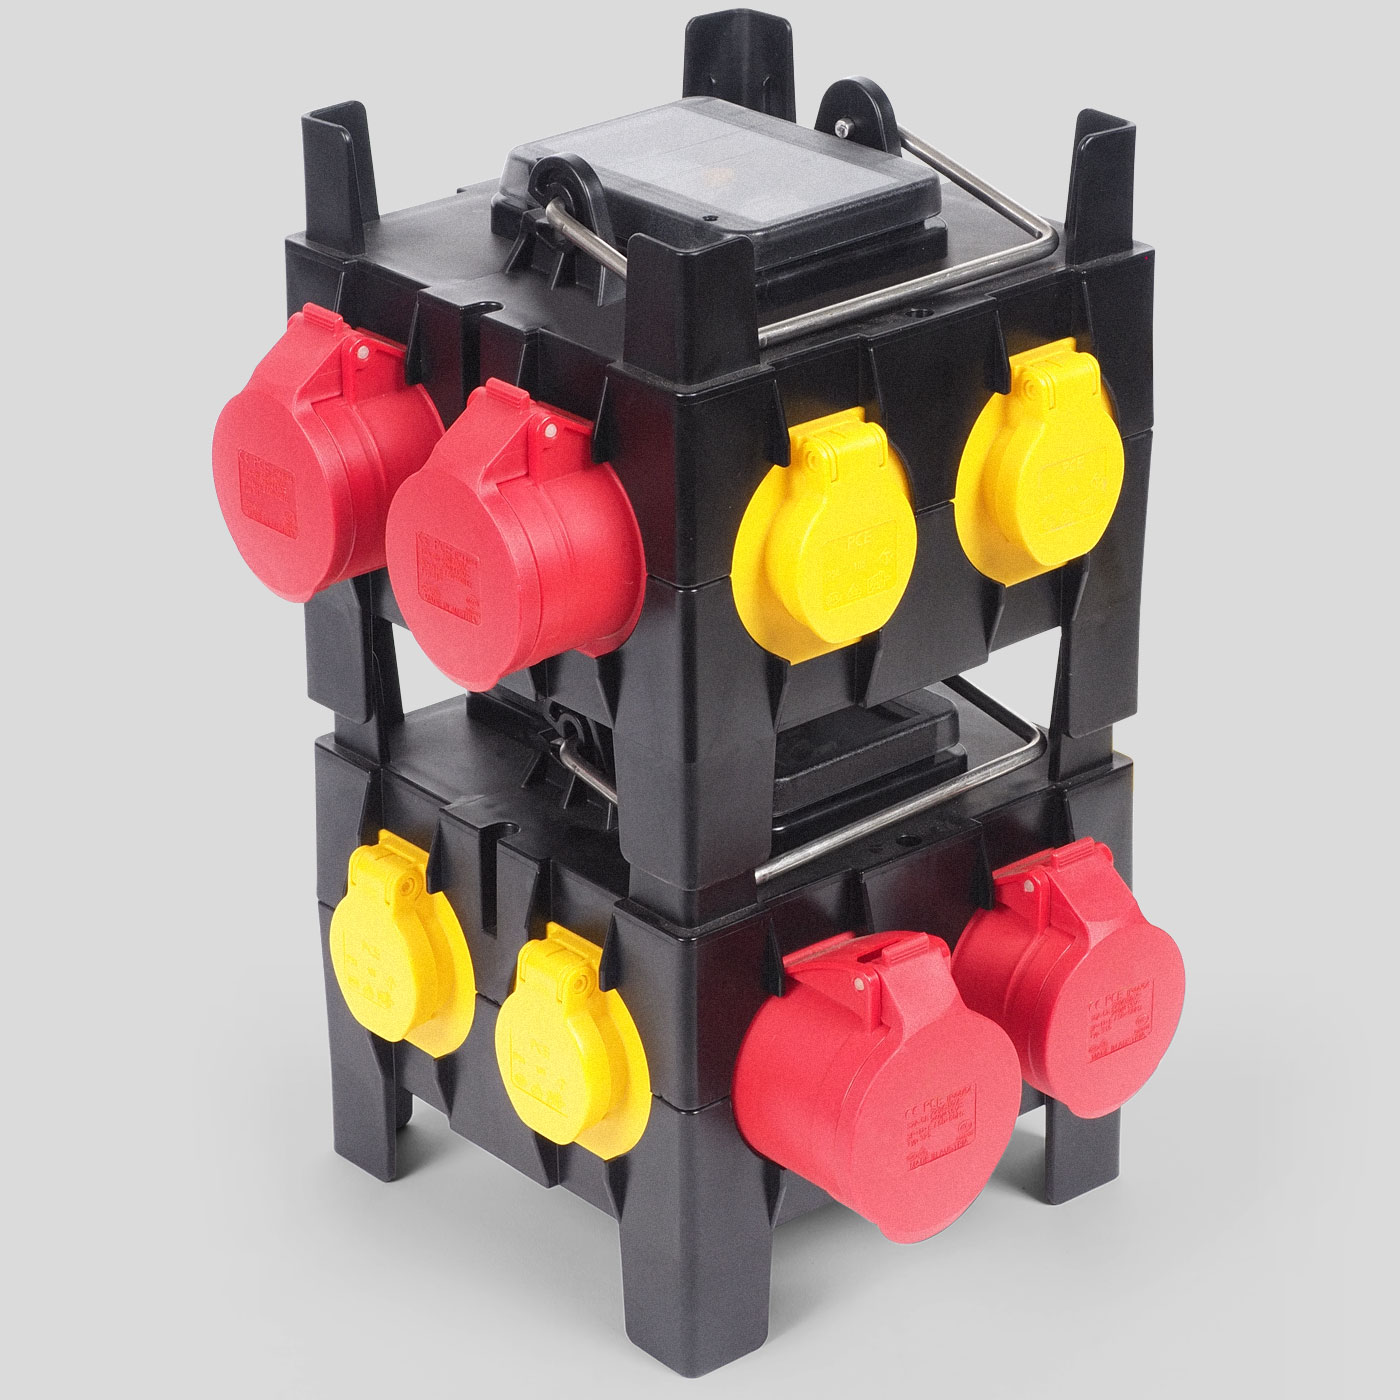 Stackable construction